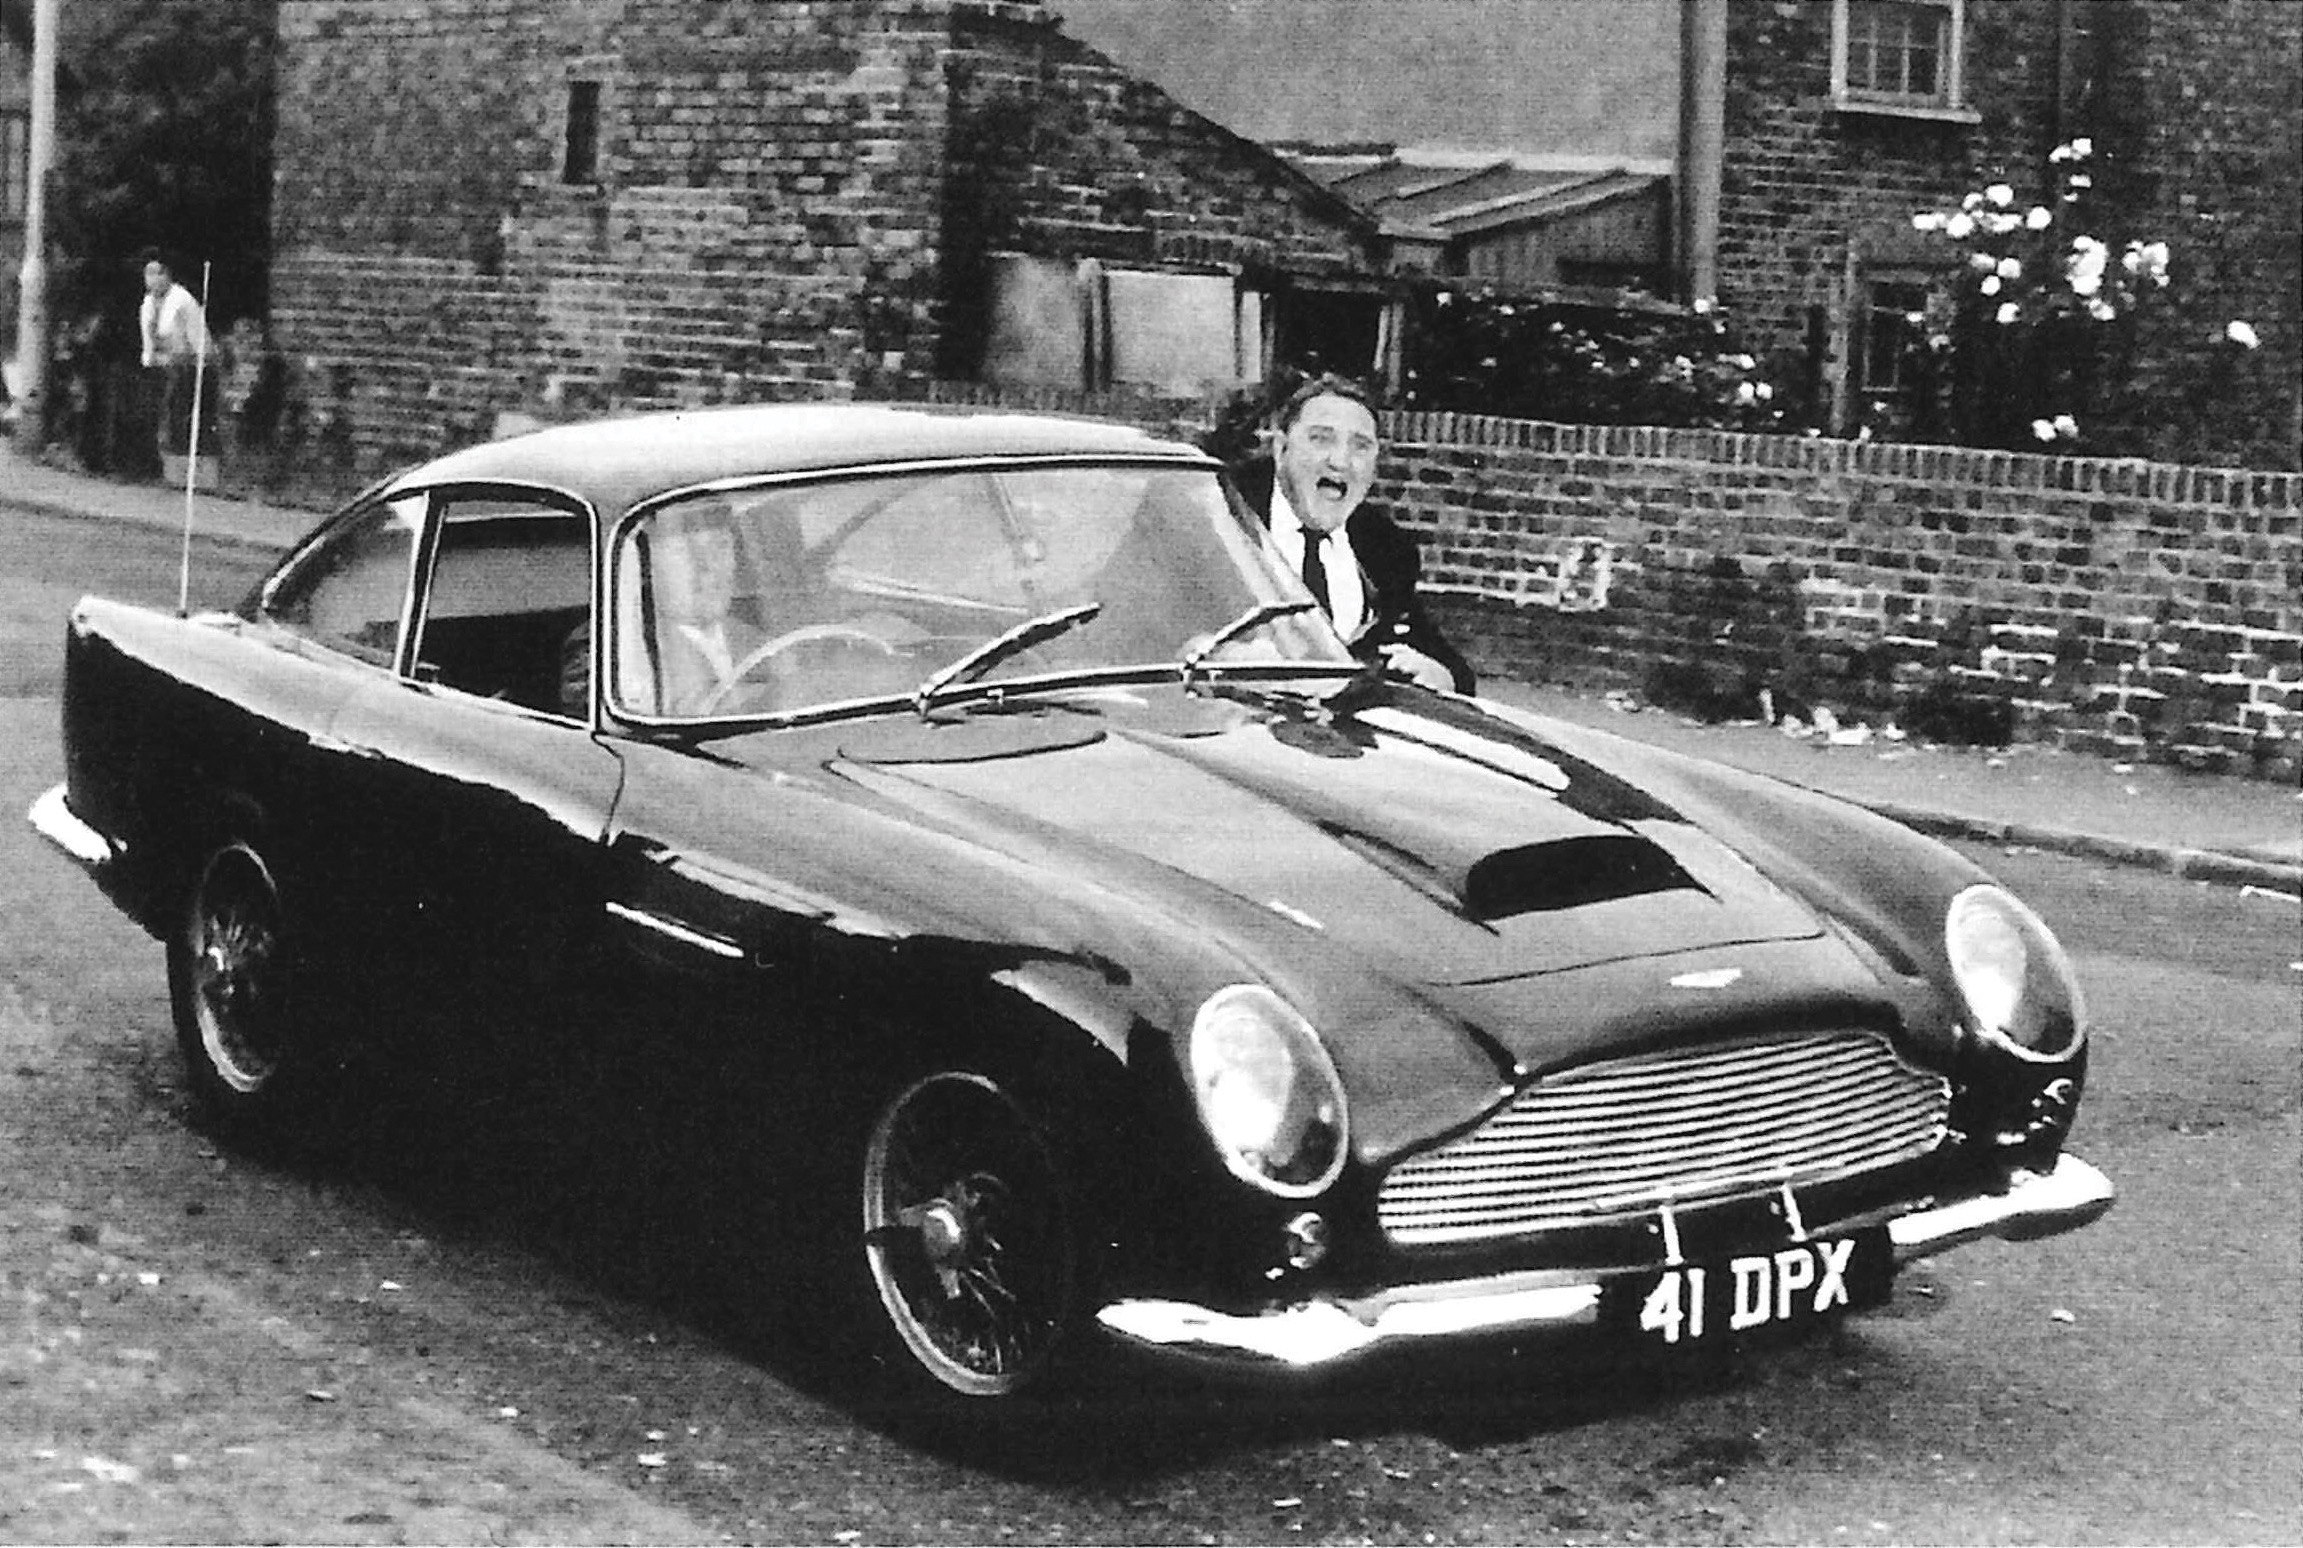 Peter Sellers, Movie star, movie car: Sellers’ DB4GT heading to auction, ClassicCars.com Journal